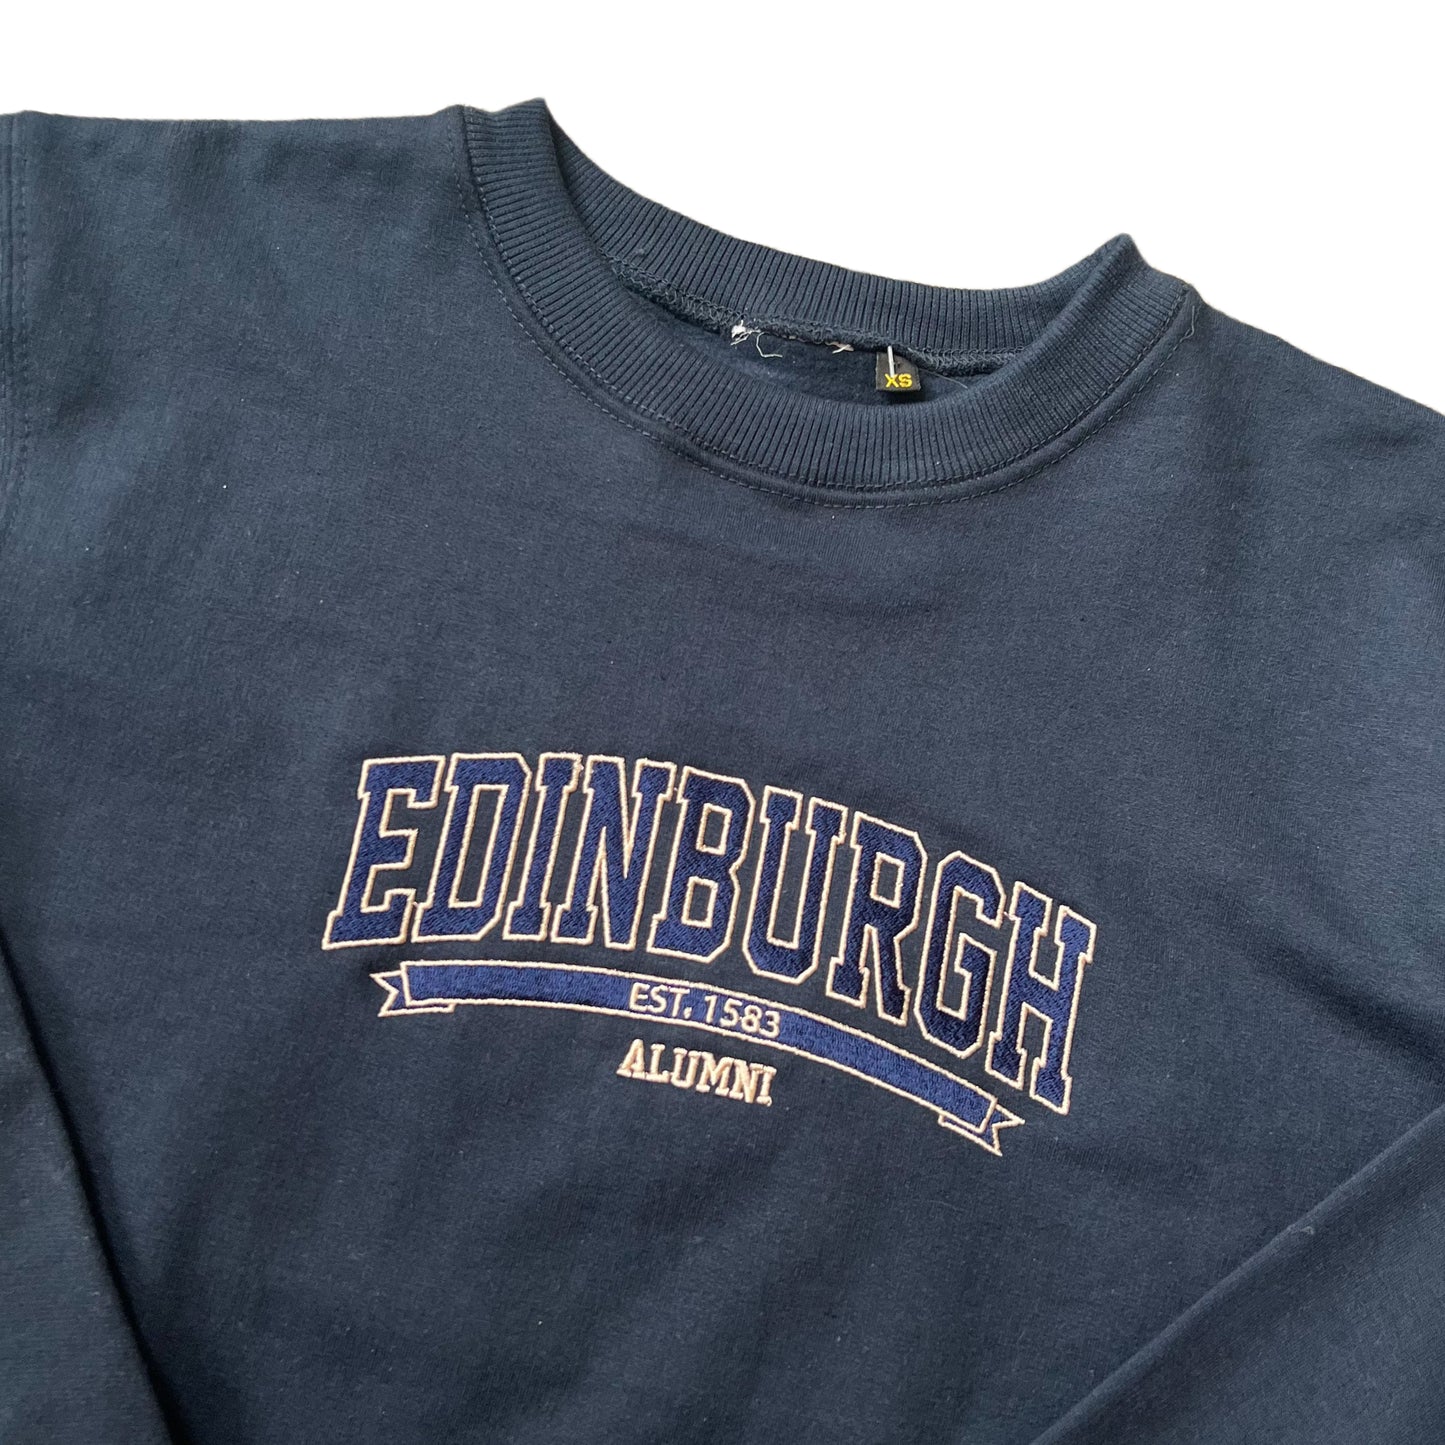 Close up of navy sweatshirt with 'EDINBURGH ALUMNI' stitched on the front in blue and white text